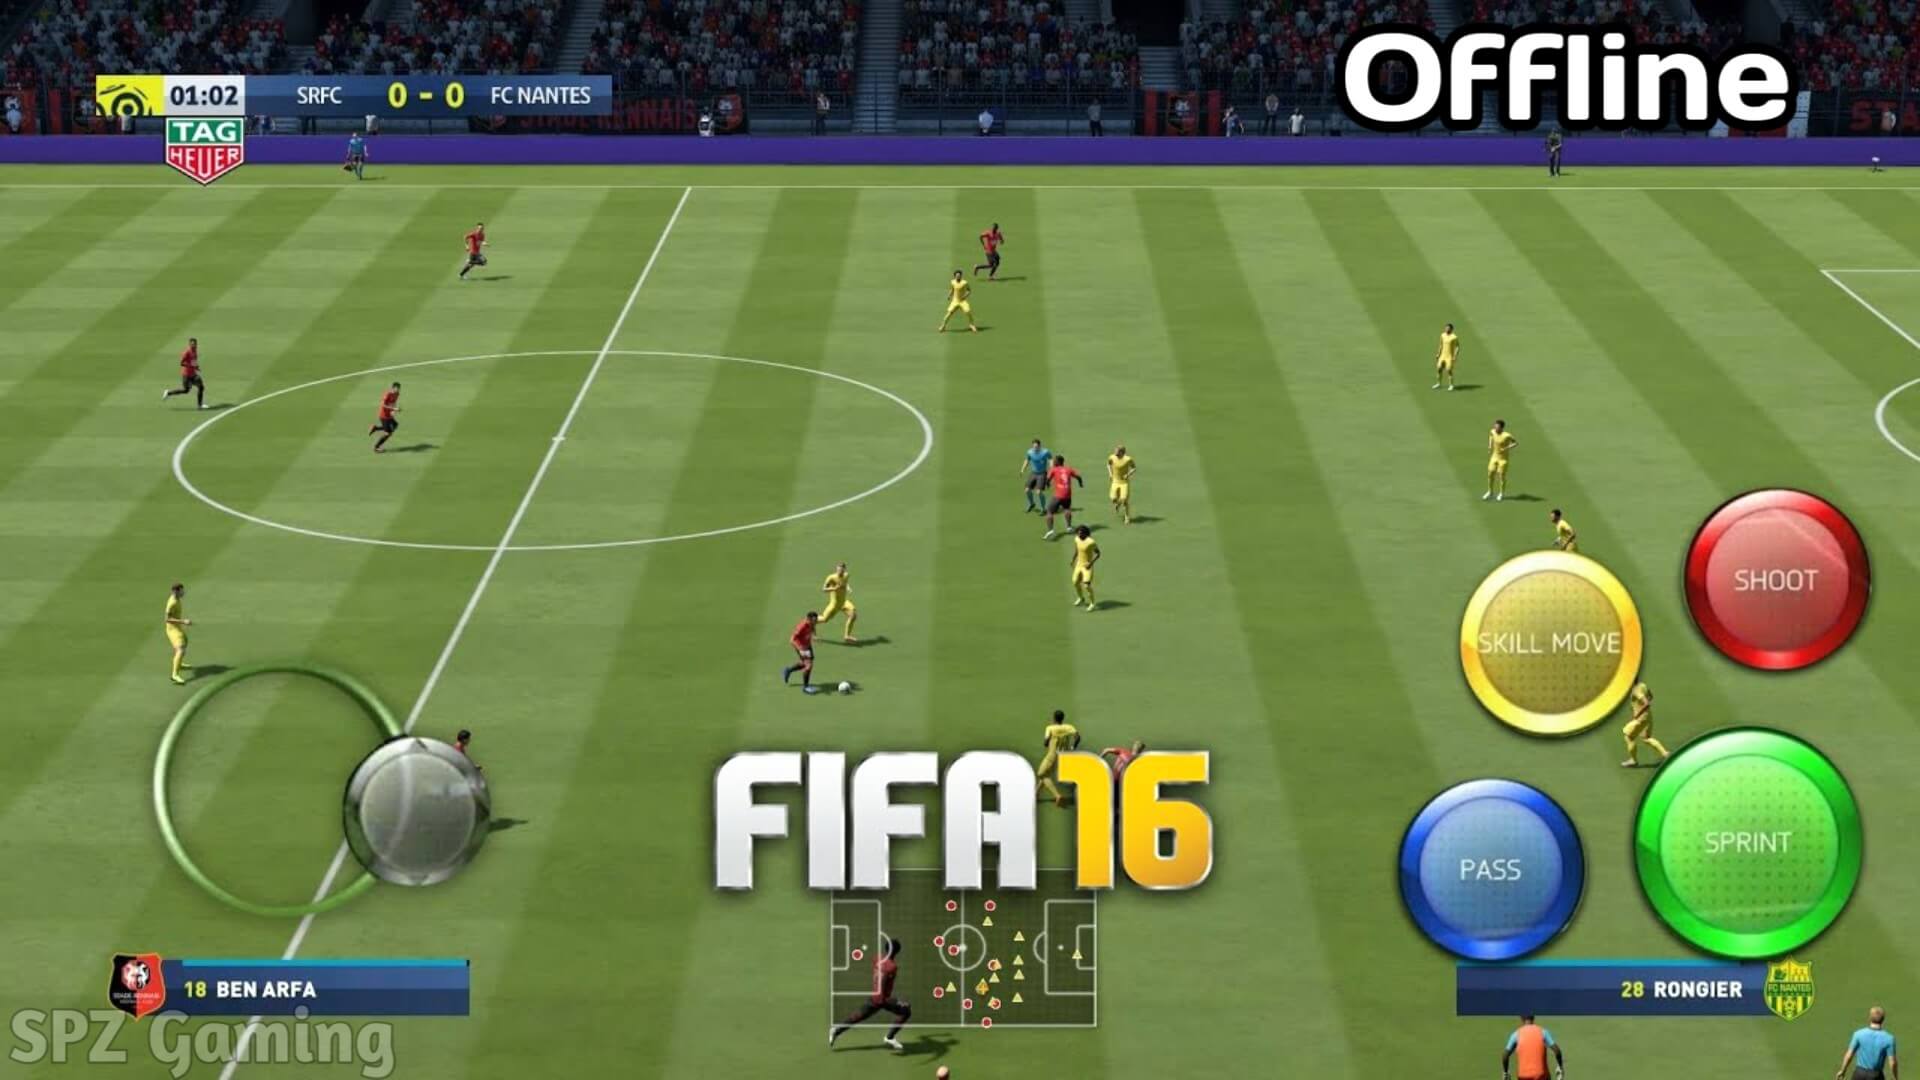 Am Schnellsten Download Fifa 17 Apk And Data Obb For Android Full Version